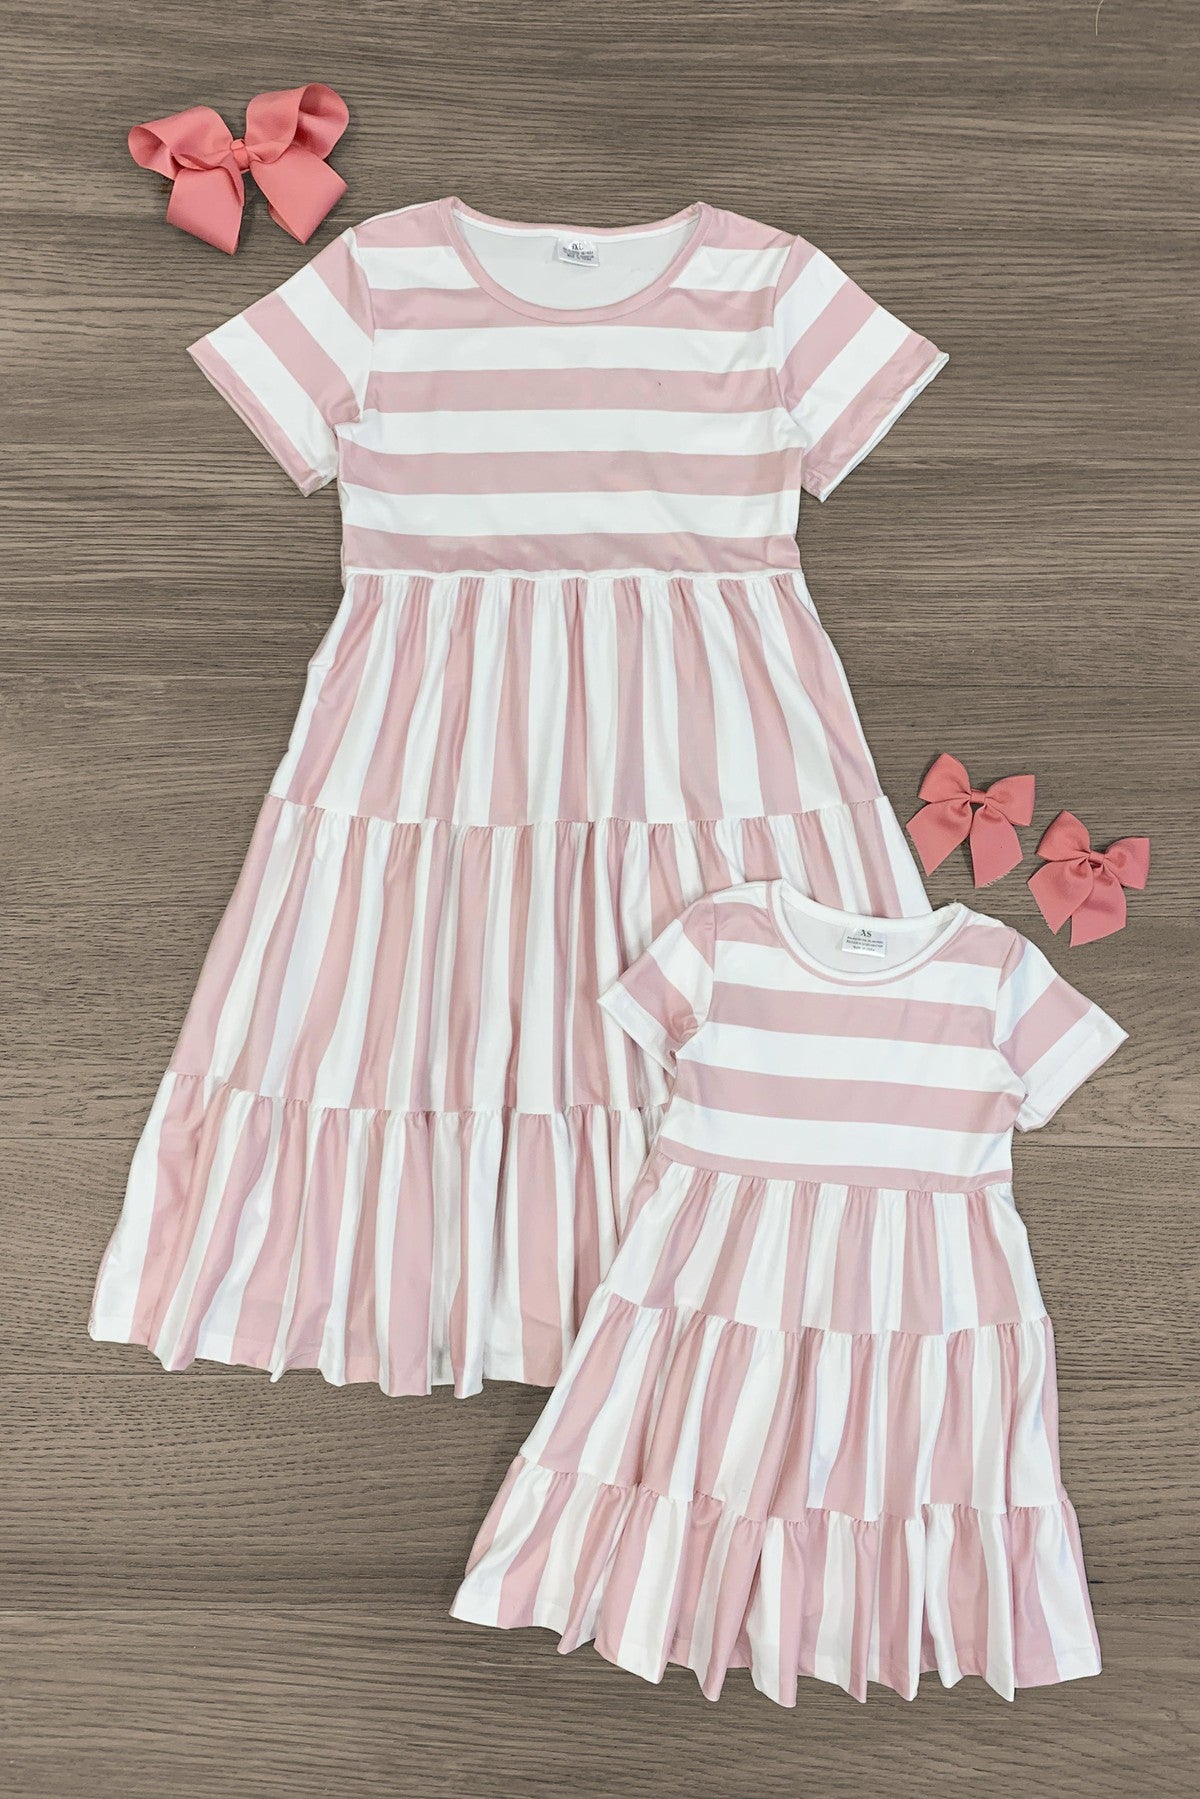 Mom & Me - Tiered Stripe Dress - Many Colors! - Sparkle in Pink